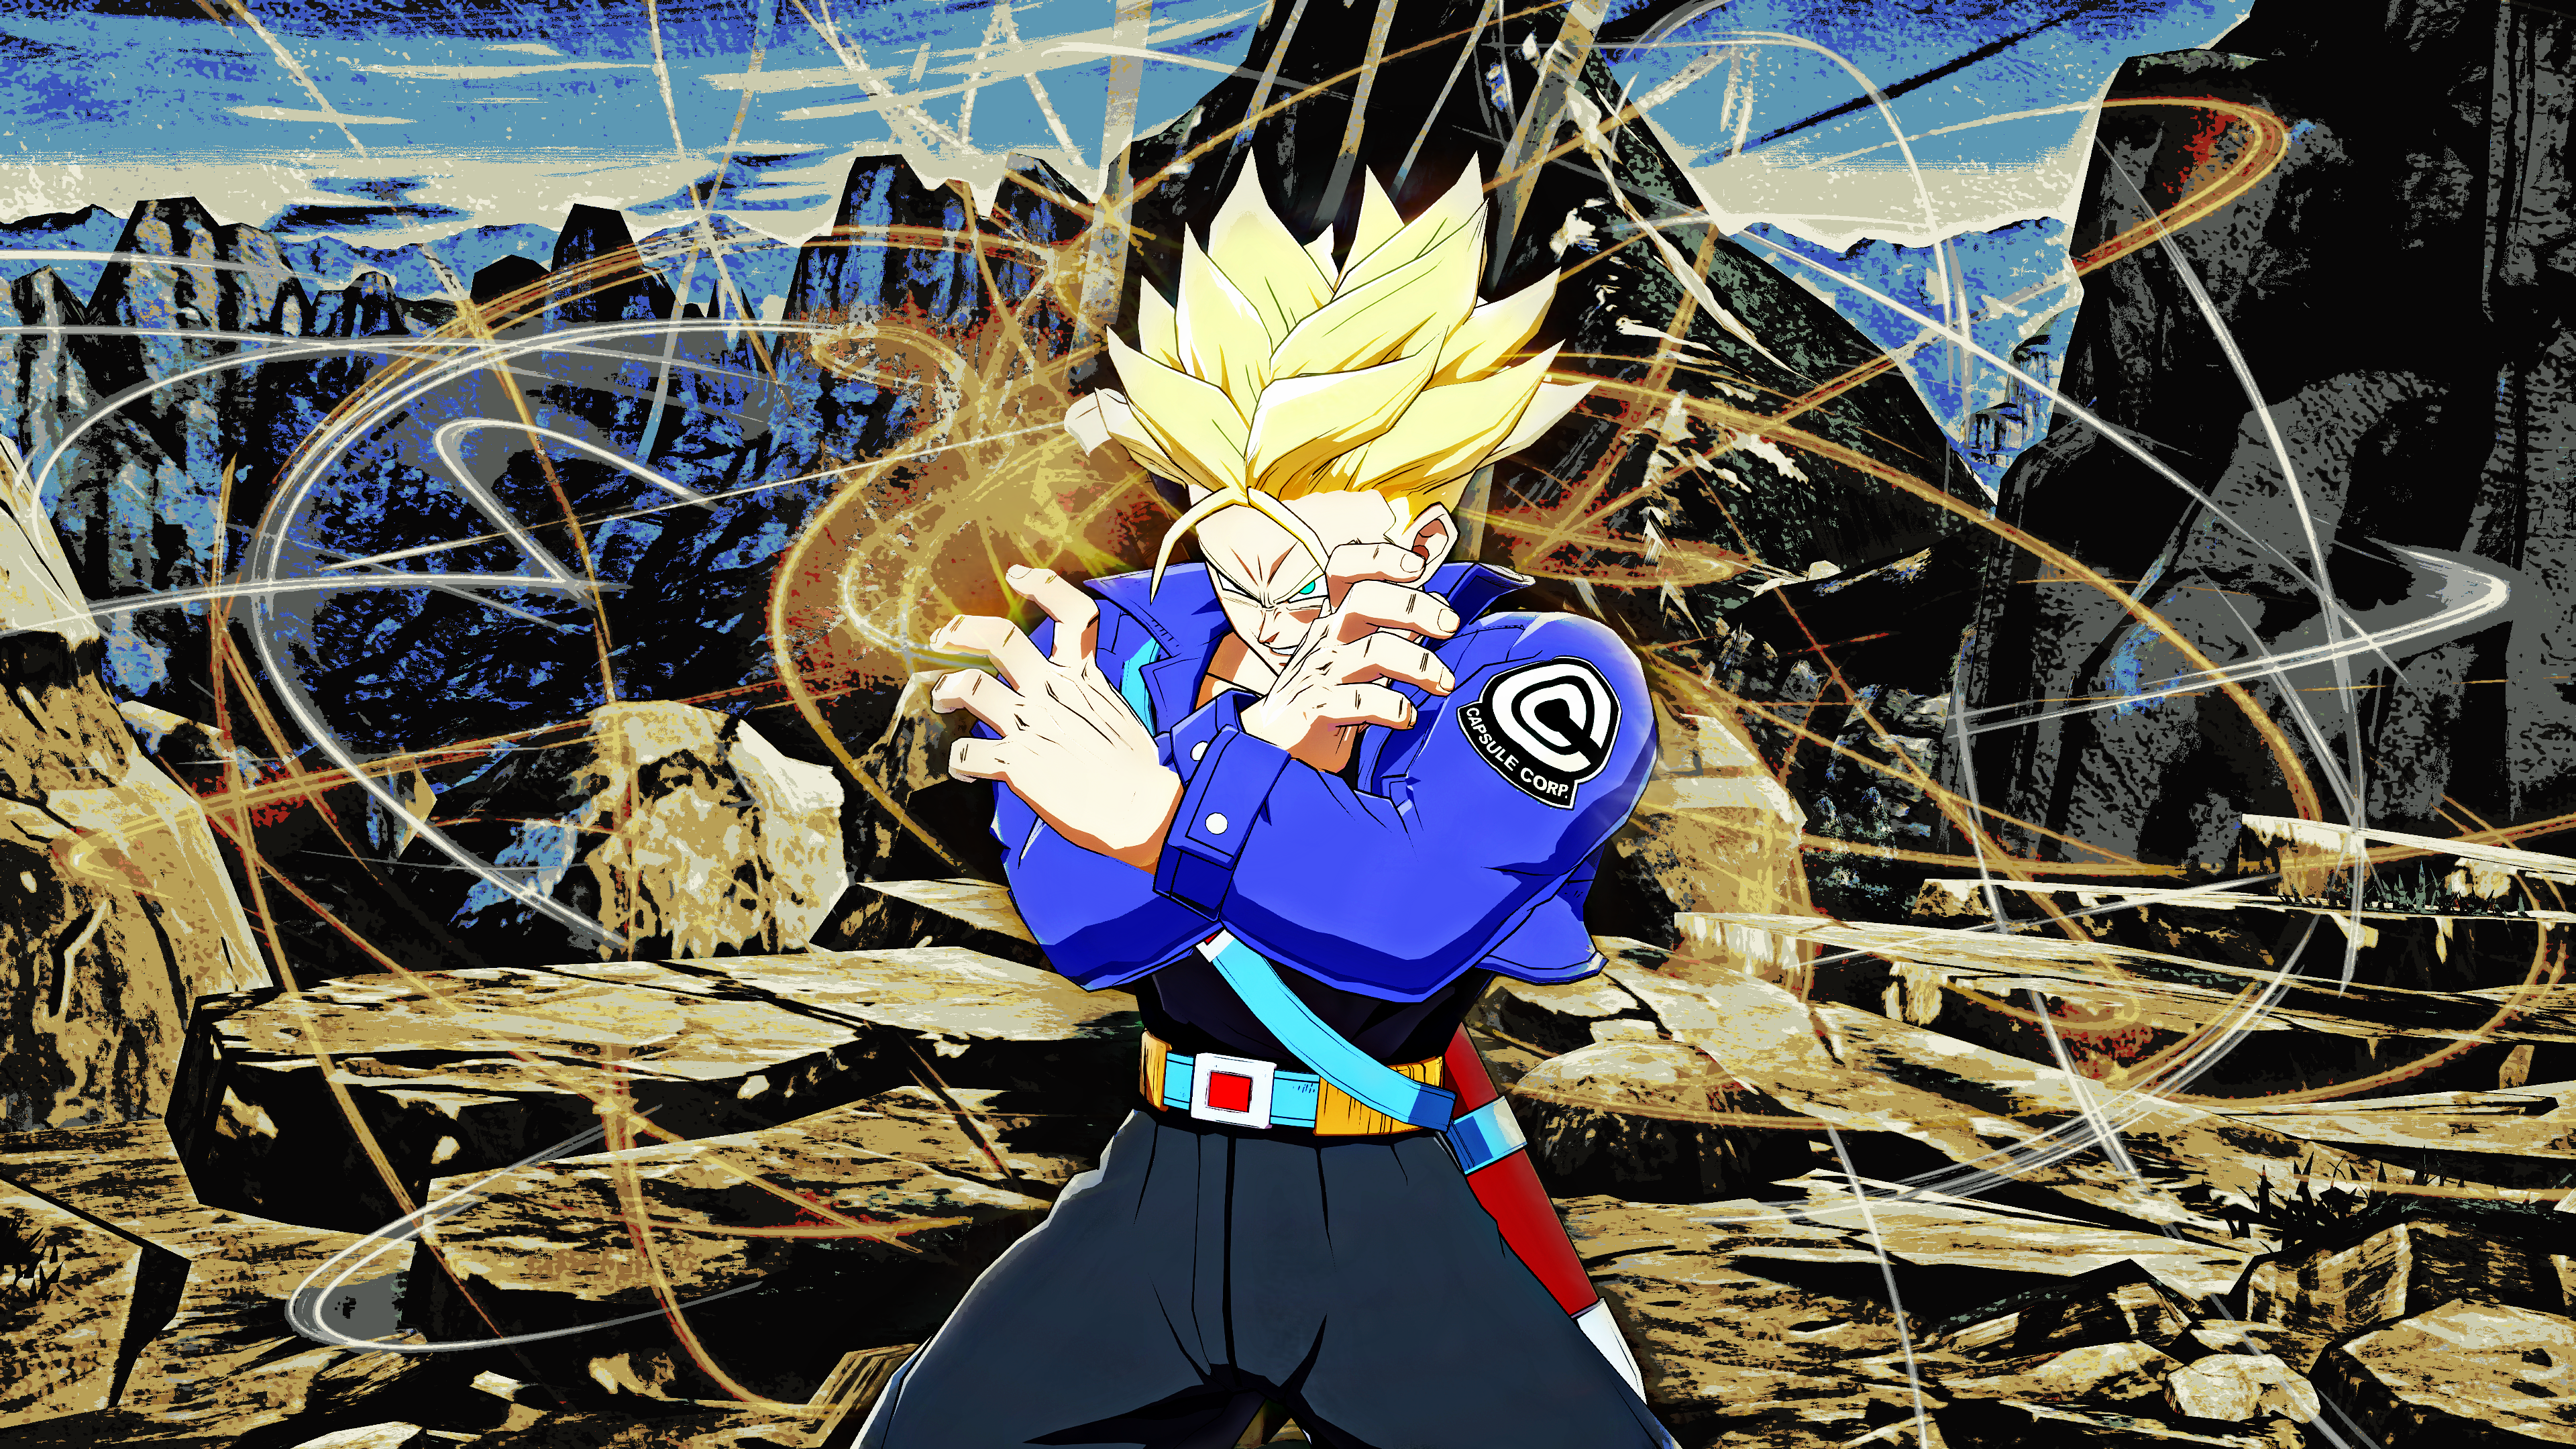 Cool Trunks Wallpapers